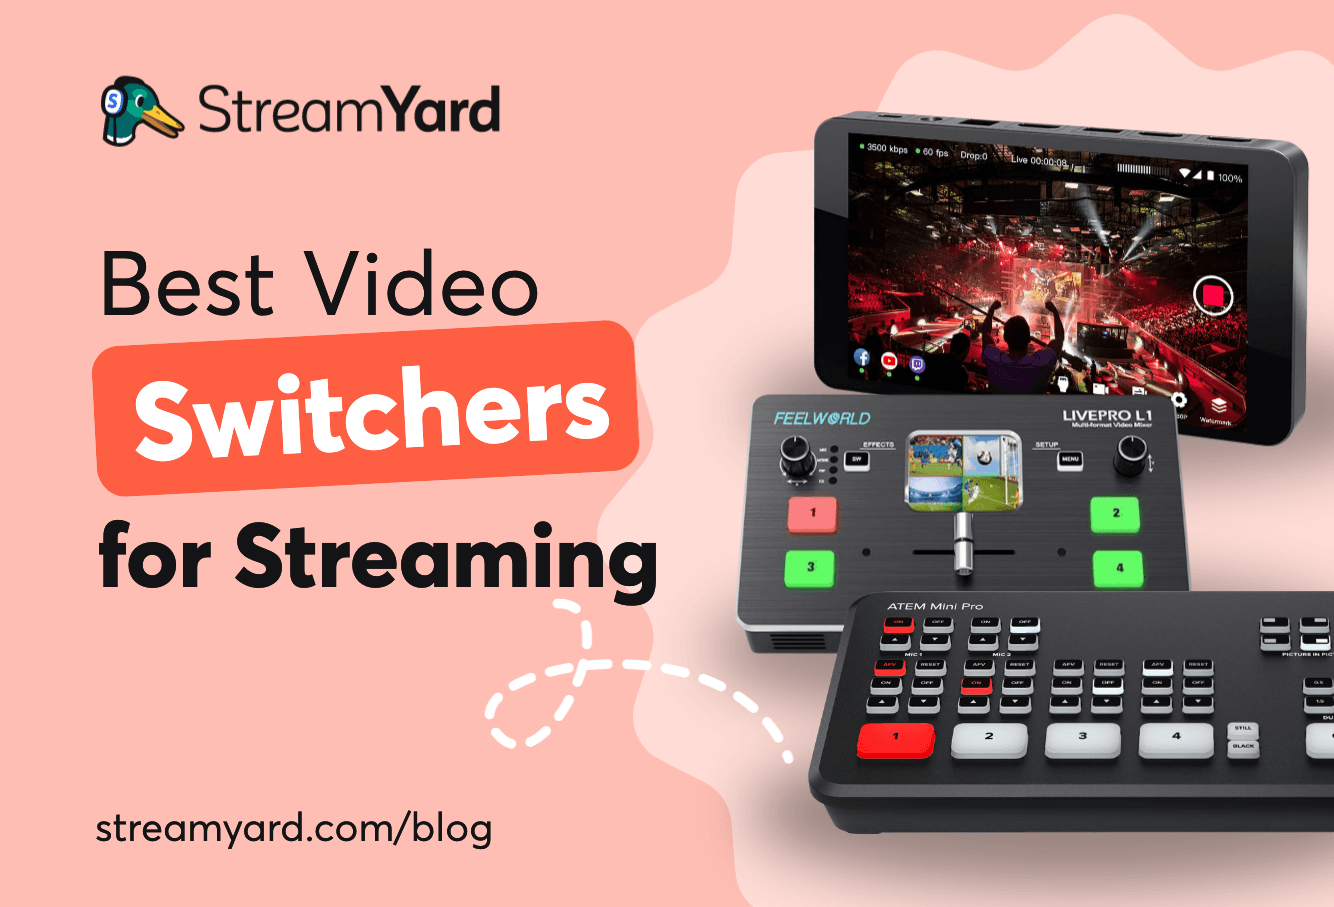 Find out the best video switchers for live streaming from Blackmagic, Roland, FeeelWorld, Yolobox and more and level up your live stream production with the top picks recommended by our experts.